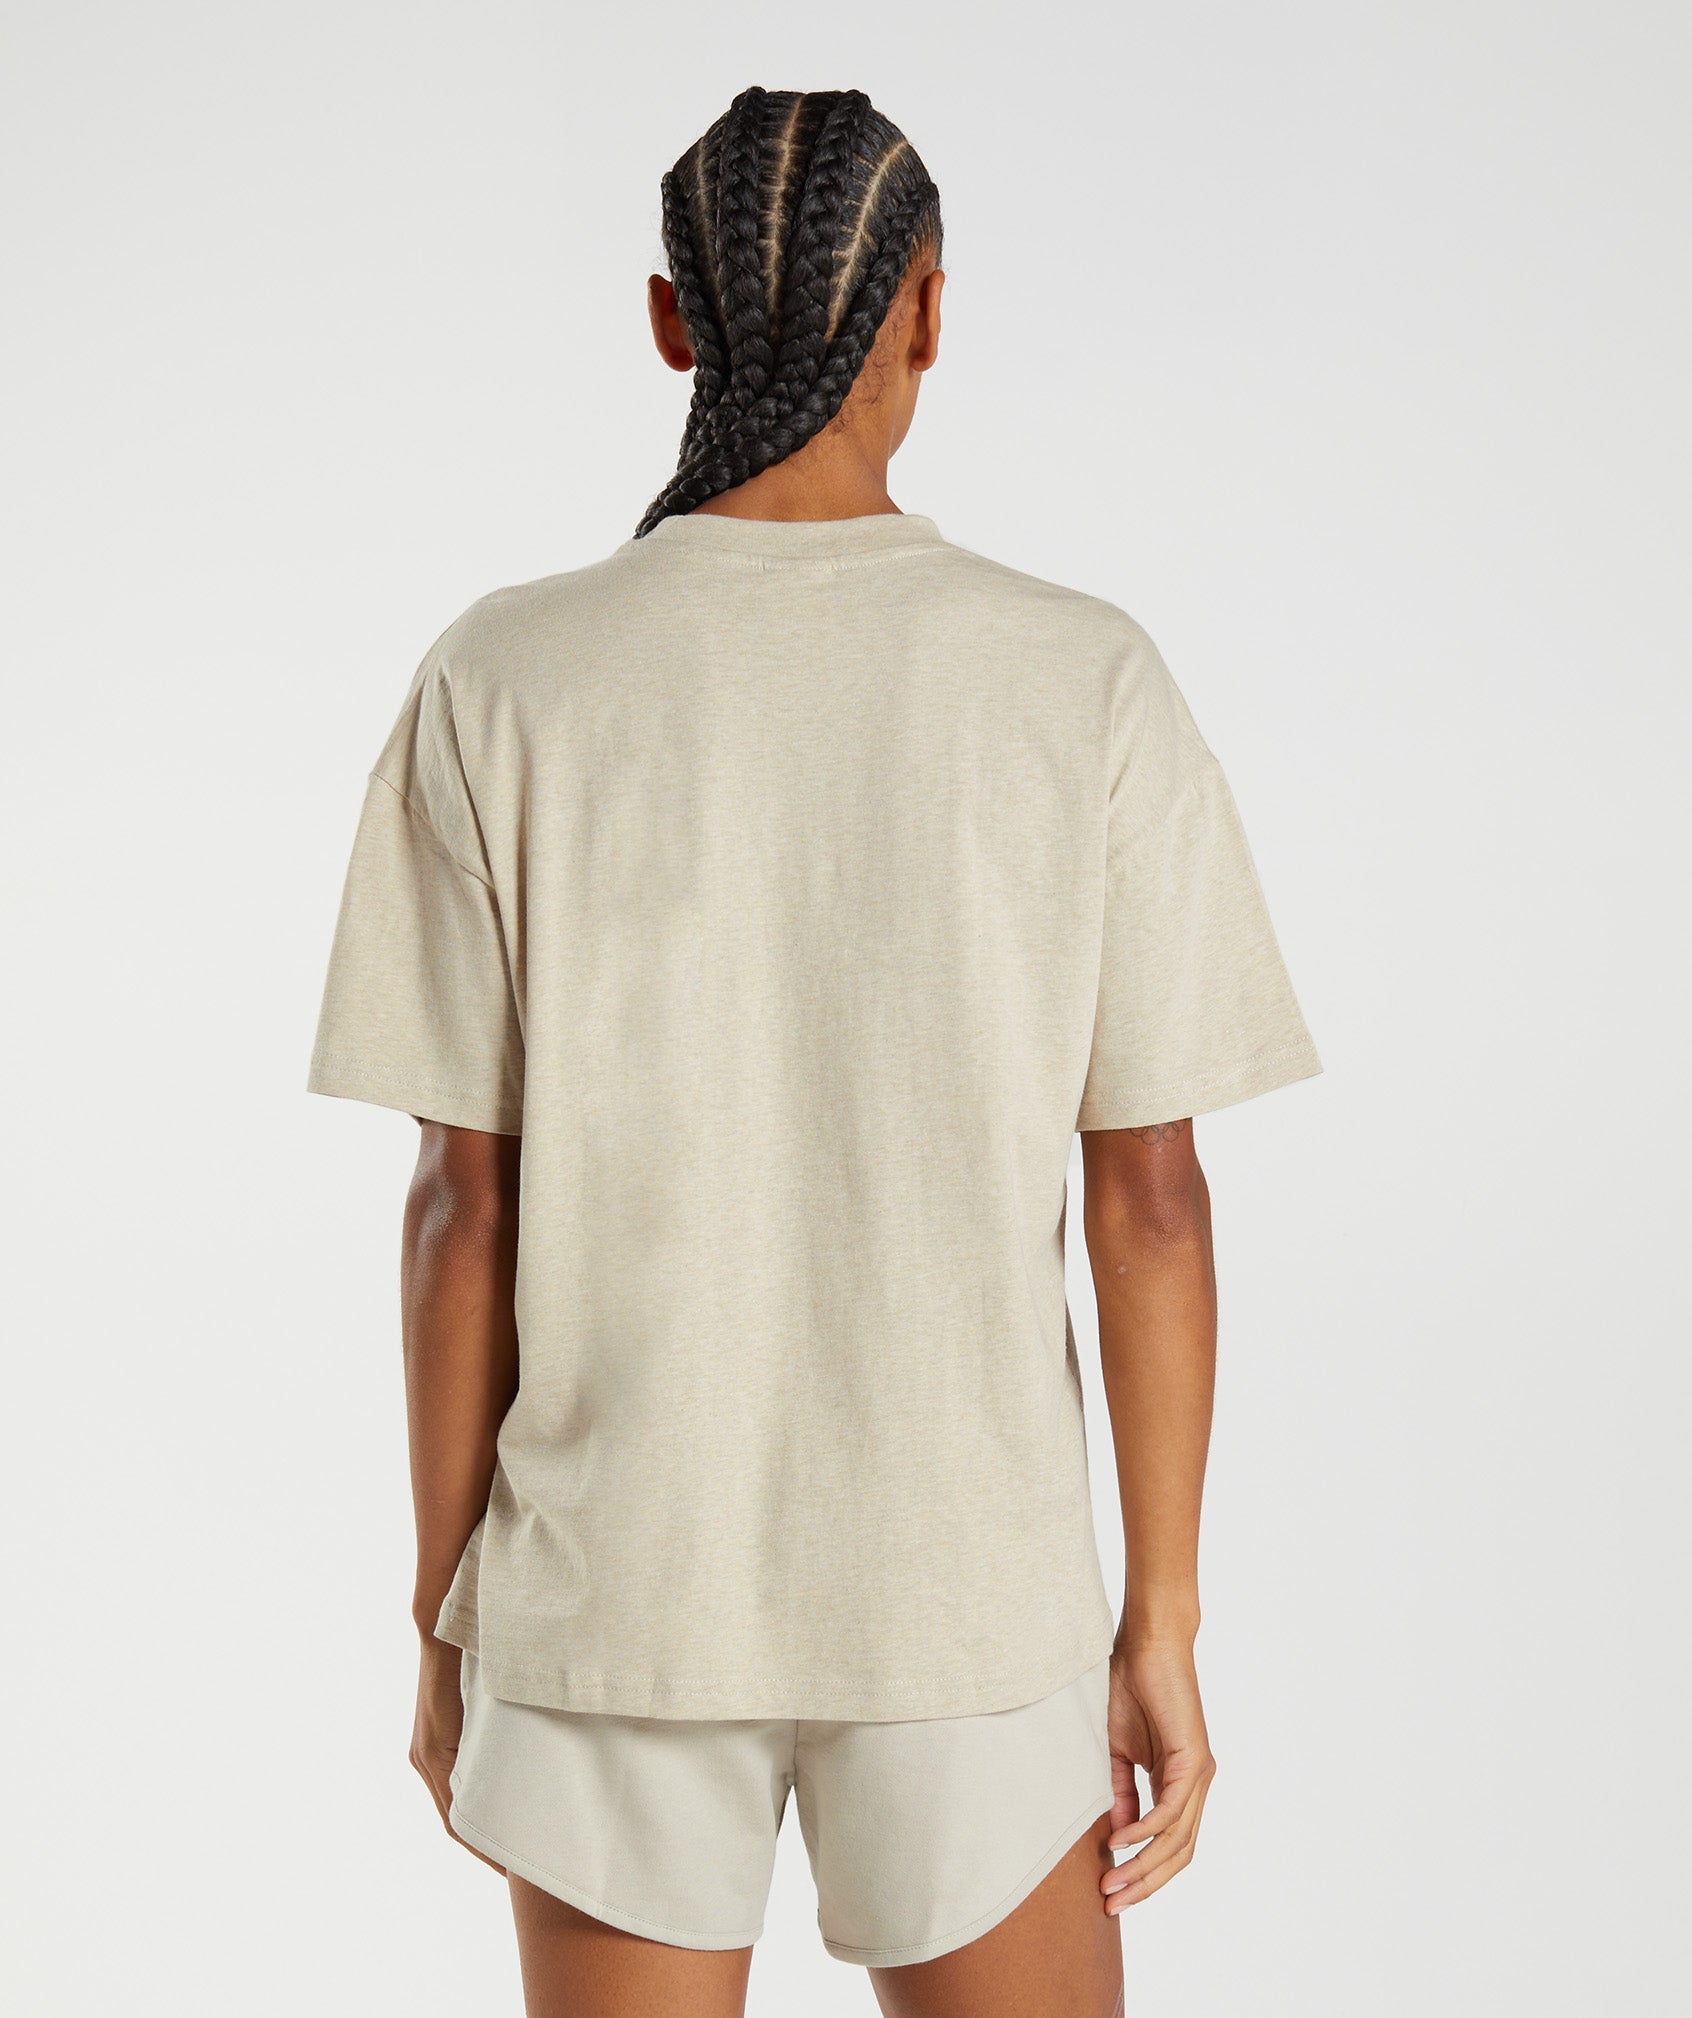 Training Oversized T-shirt in Sand Marl - view 2